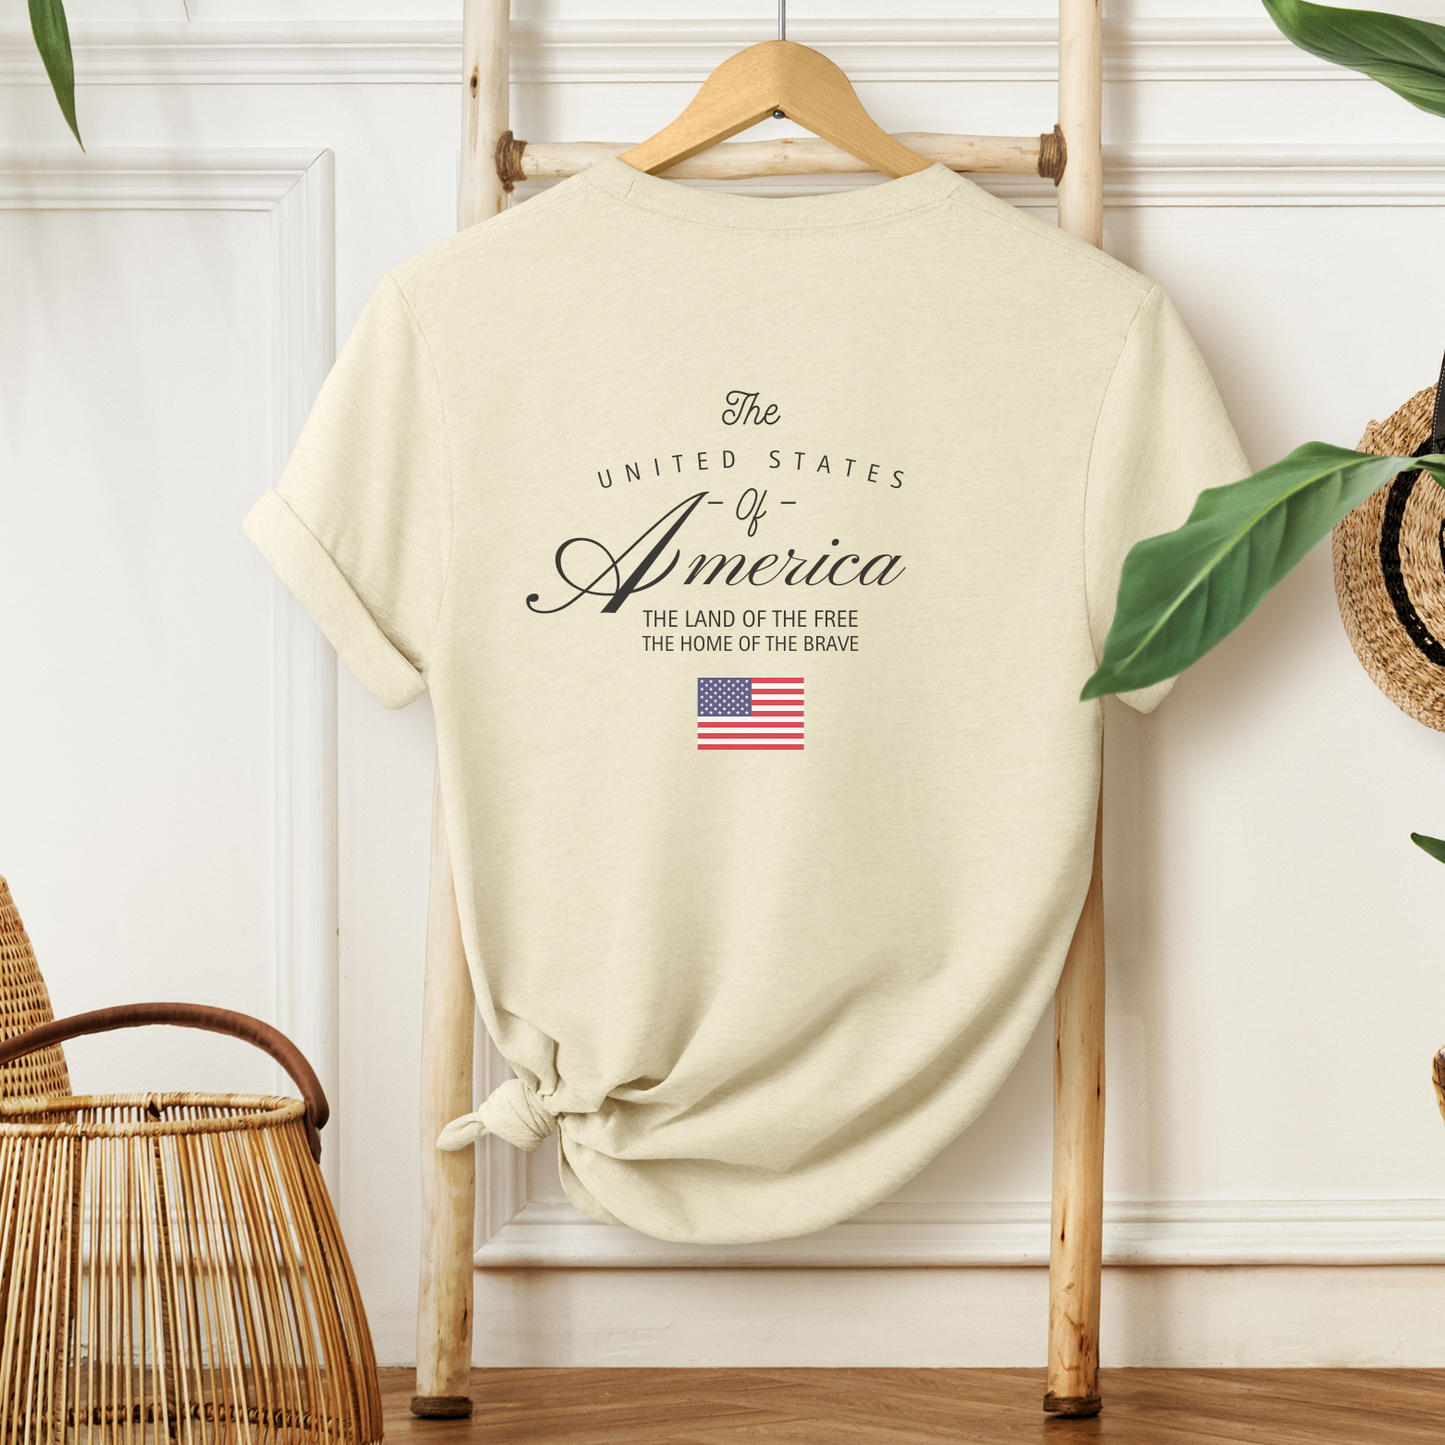 The United States of America (wholesale)